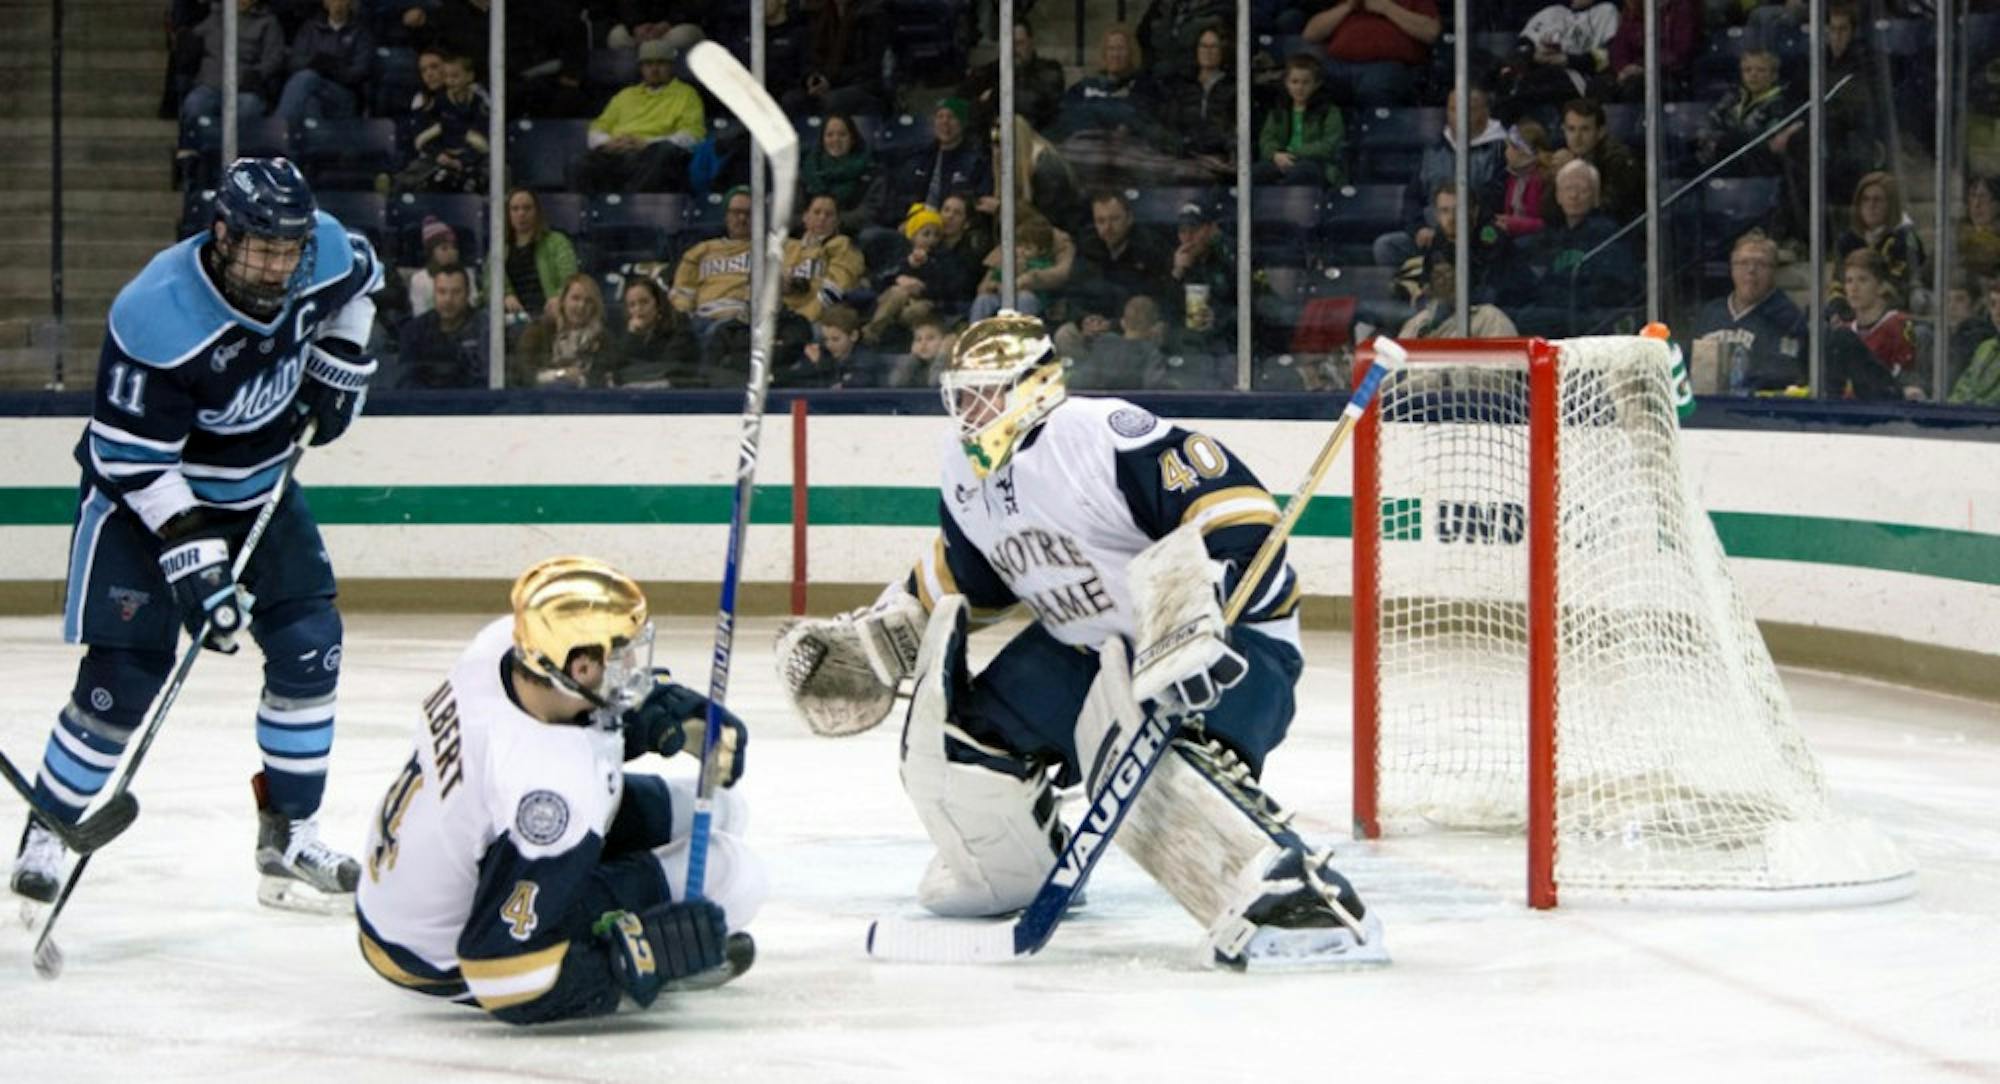 Irish sophomore goalie Cal Petersen looks through traffic during Notre Dame’s 5-1 win over Maine on Feb. 13 at Compton Family Ice Arena. Petersen posted a .927 save percentage on the season.